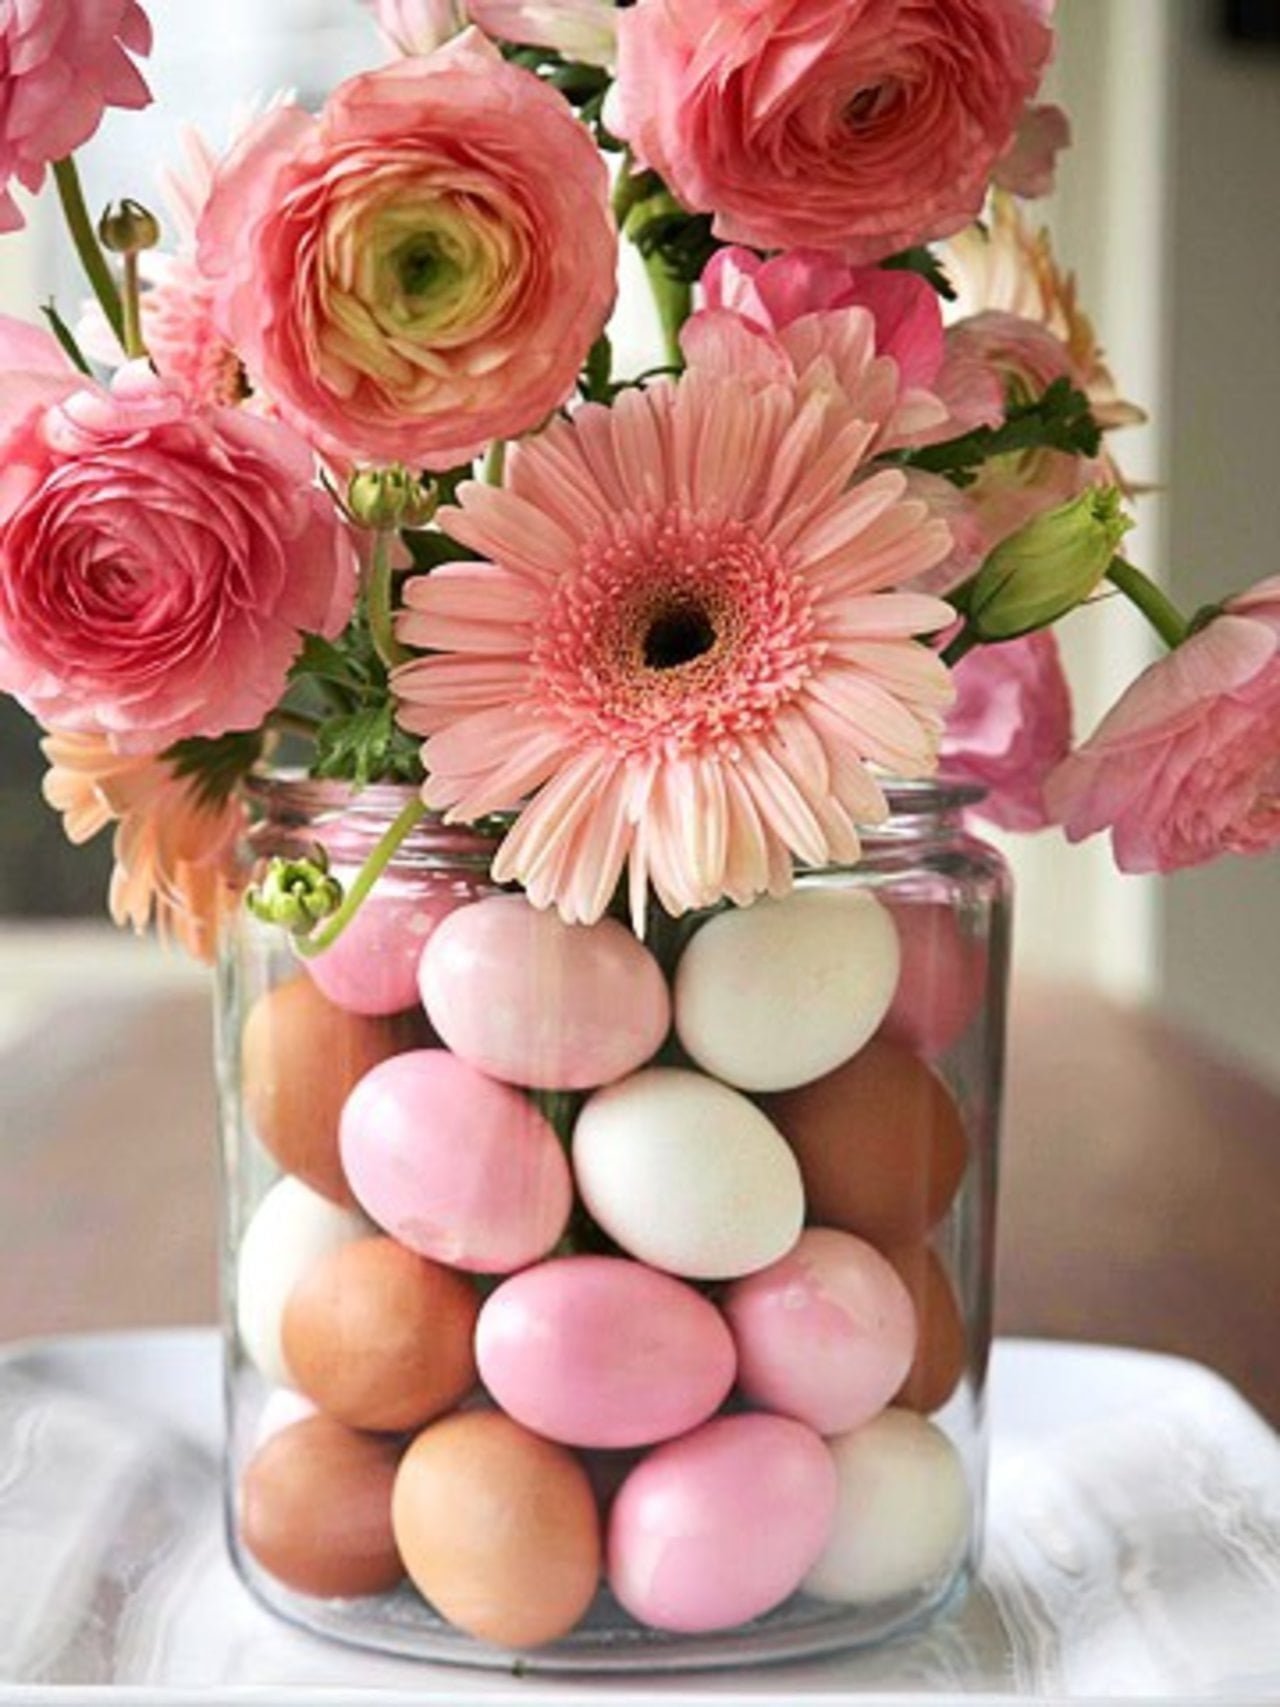 Fill a Large Vase with Colored Eggs